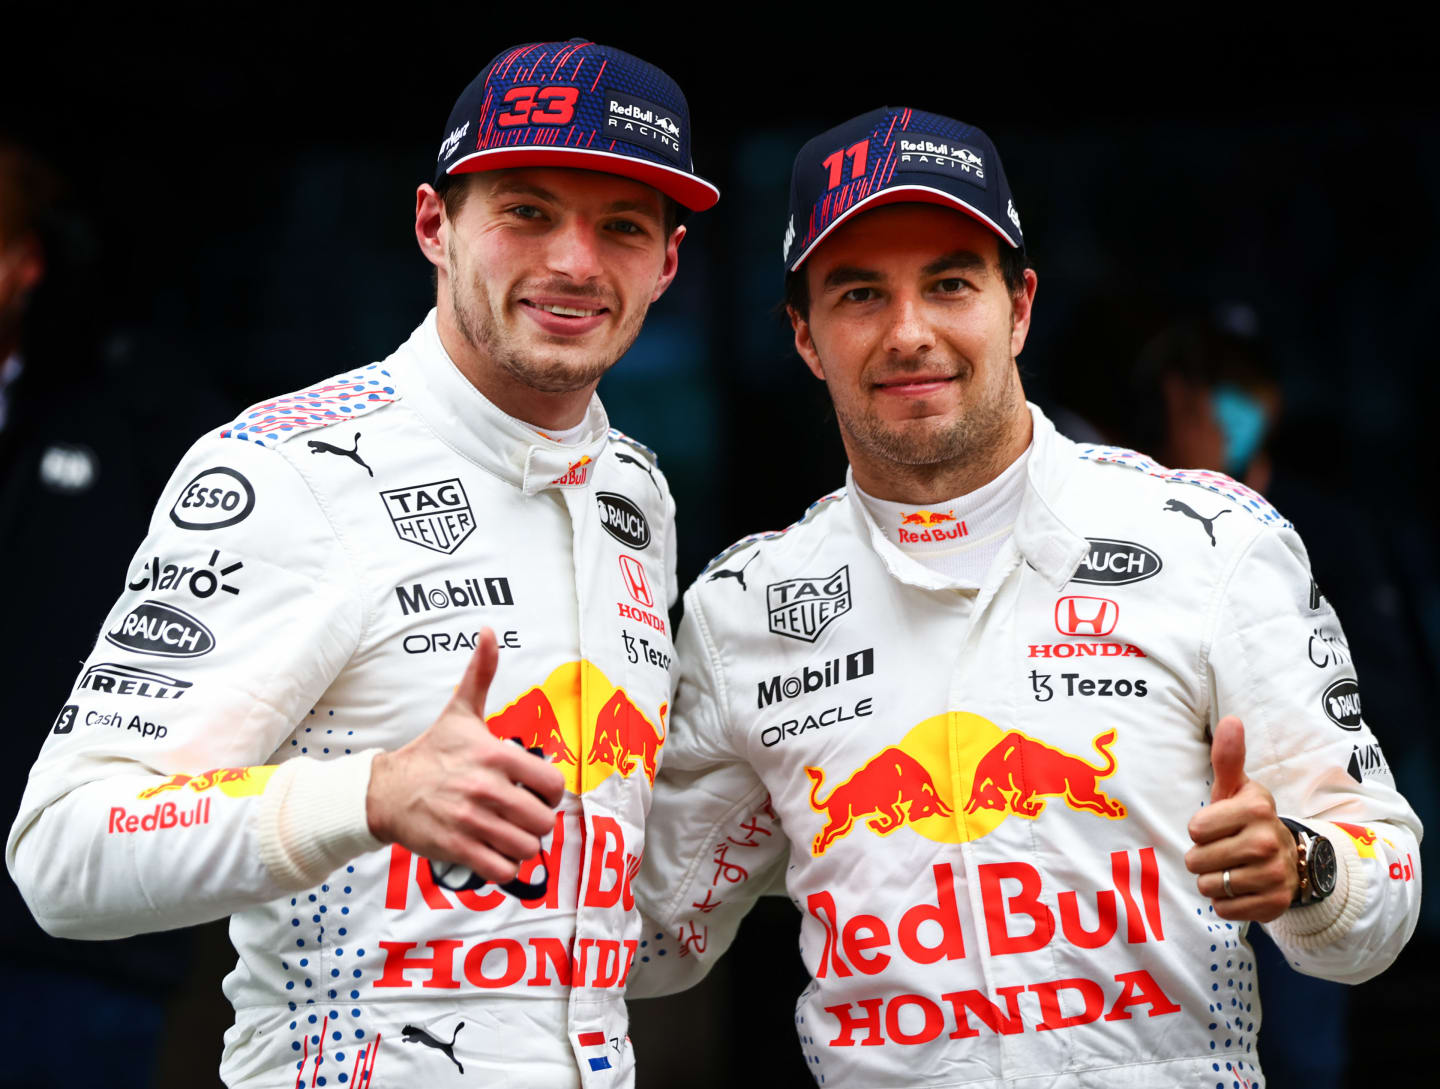 ISTANBUL, TURKEY - OCTOBER 10: Second placed Max Verstappen of Netherlands and Red Bull Racing and third placed Sergio Perez of Mexico and Red Bull Racing celebrate in parc ferme during the F1 Grand Prix of Turkey at Intercity Istanbul Park on October 10, 2021 in Istanbul, Turkey. (Photo by Mark Thompson/Getty Images)